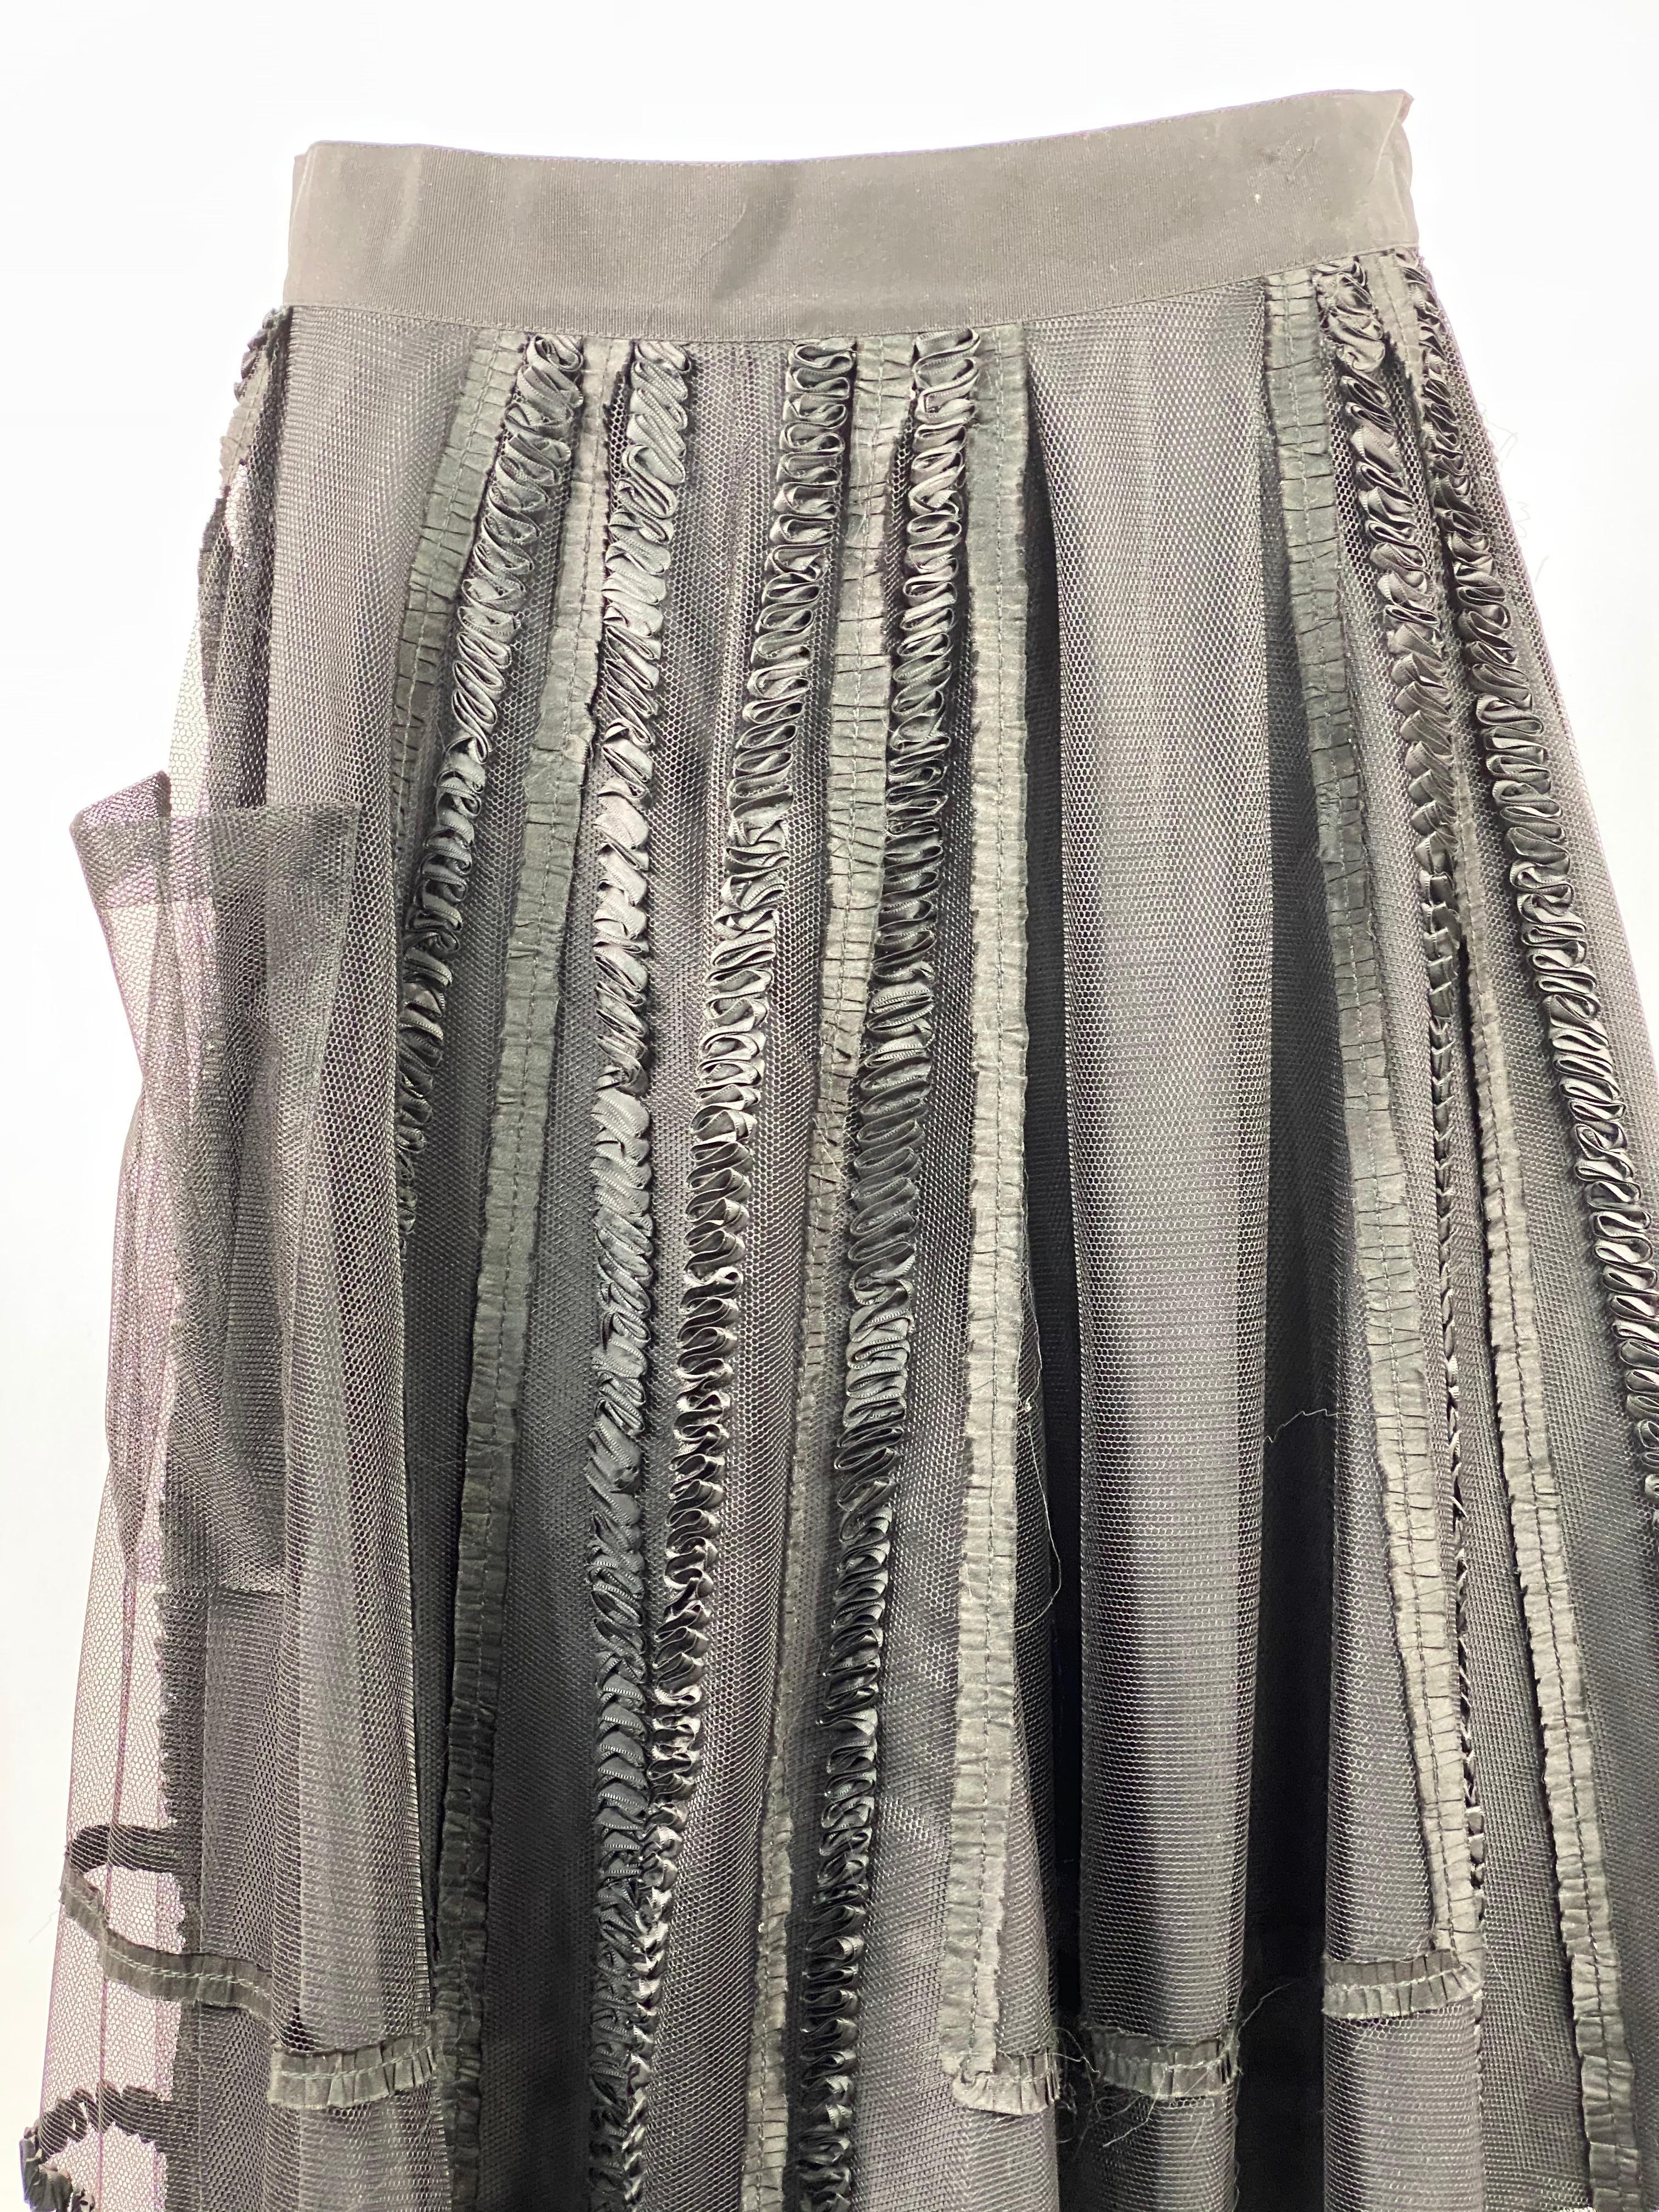 NINA RICCI Black Silk and Mesh Midi Skirt Size 40

Product detail:
Size 40 
100% Silk
Featuring mesh finish w/ side pocket
Side two hooks and two shank click in buttons closure
Made in France
